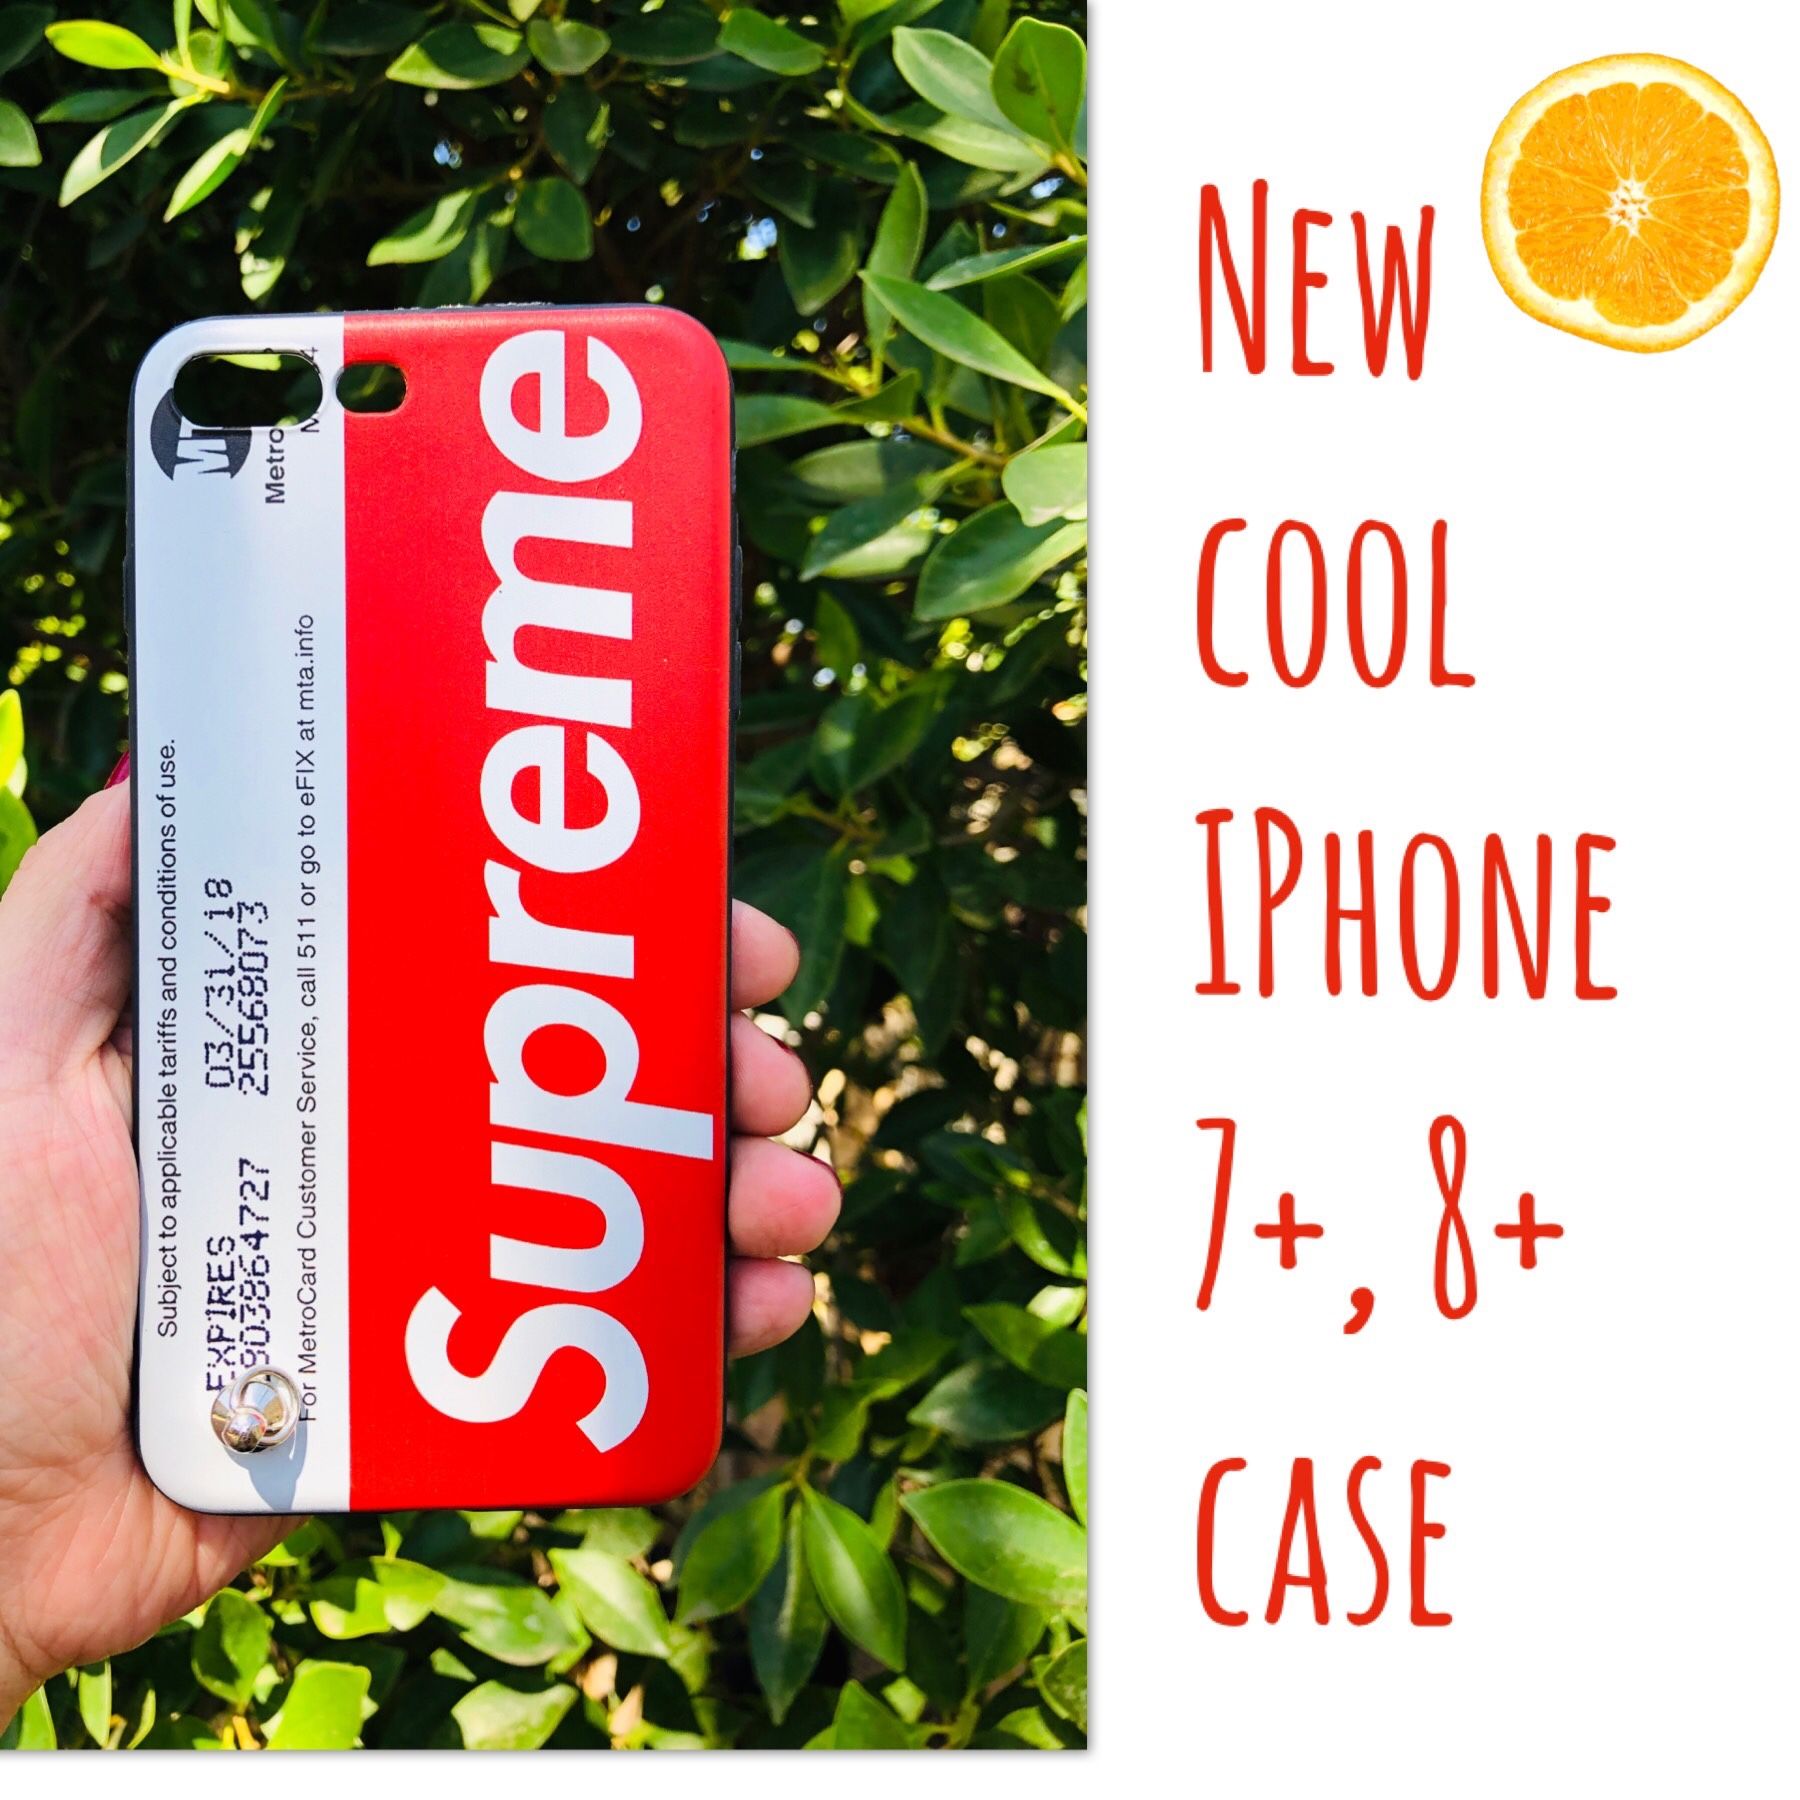 New cool iphone 7+ or iphone 8+ PLUS case rubber supreme red keychain case hypebeast hype swag men’s guys women’s